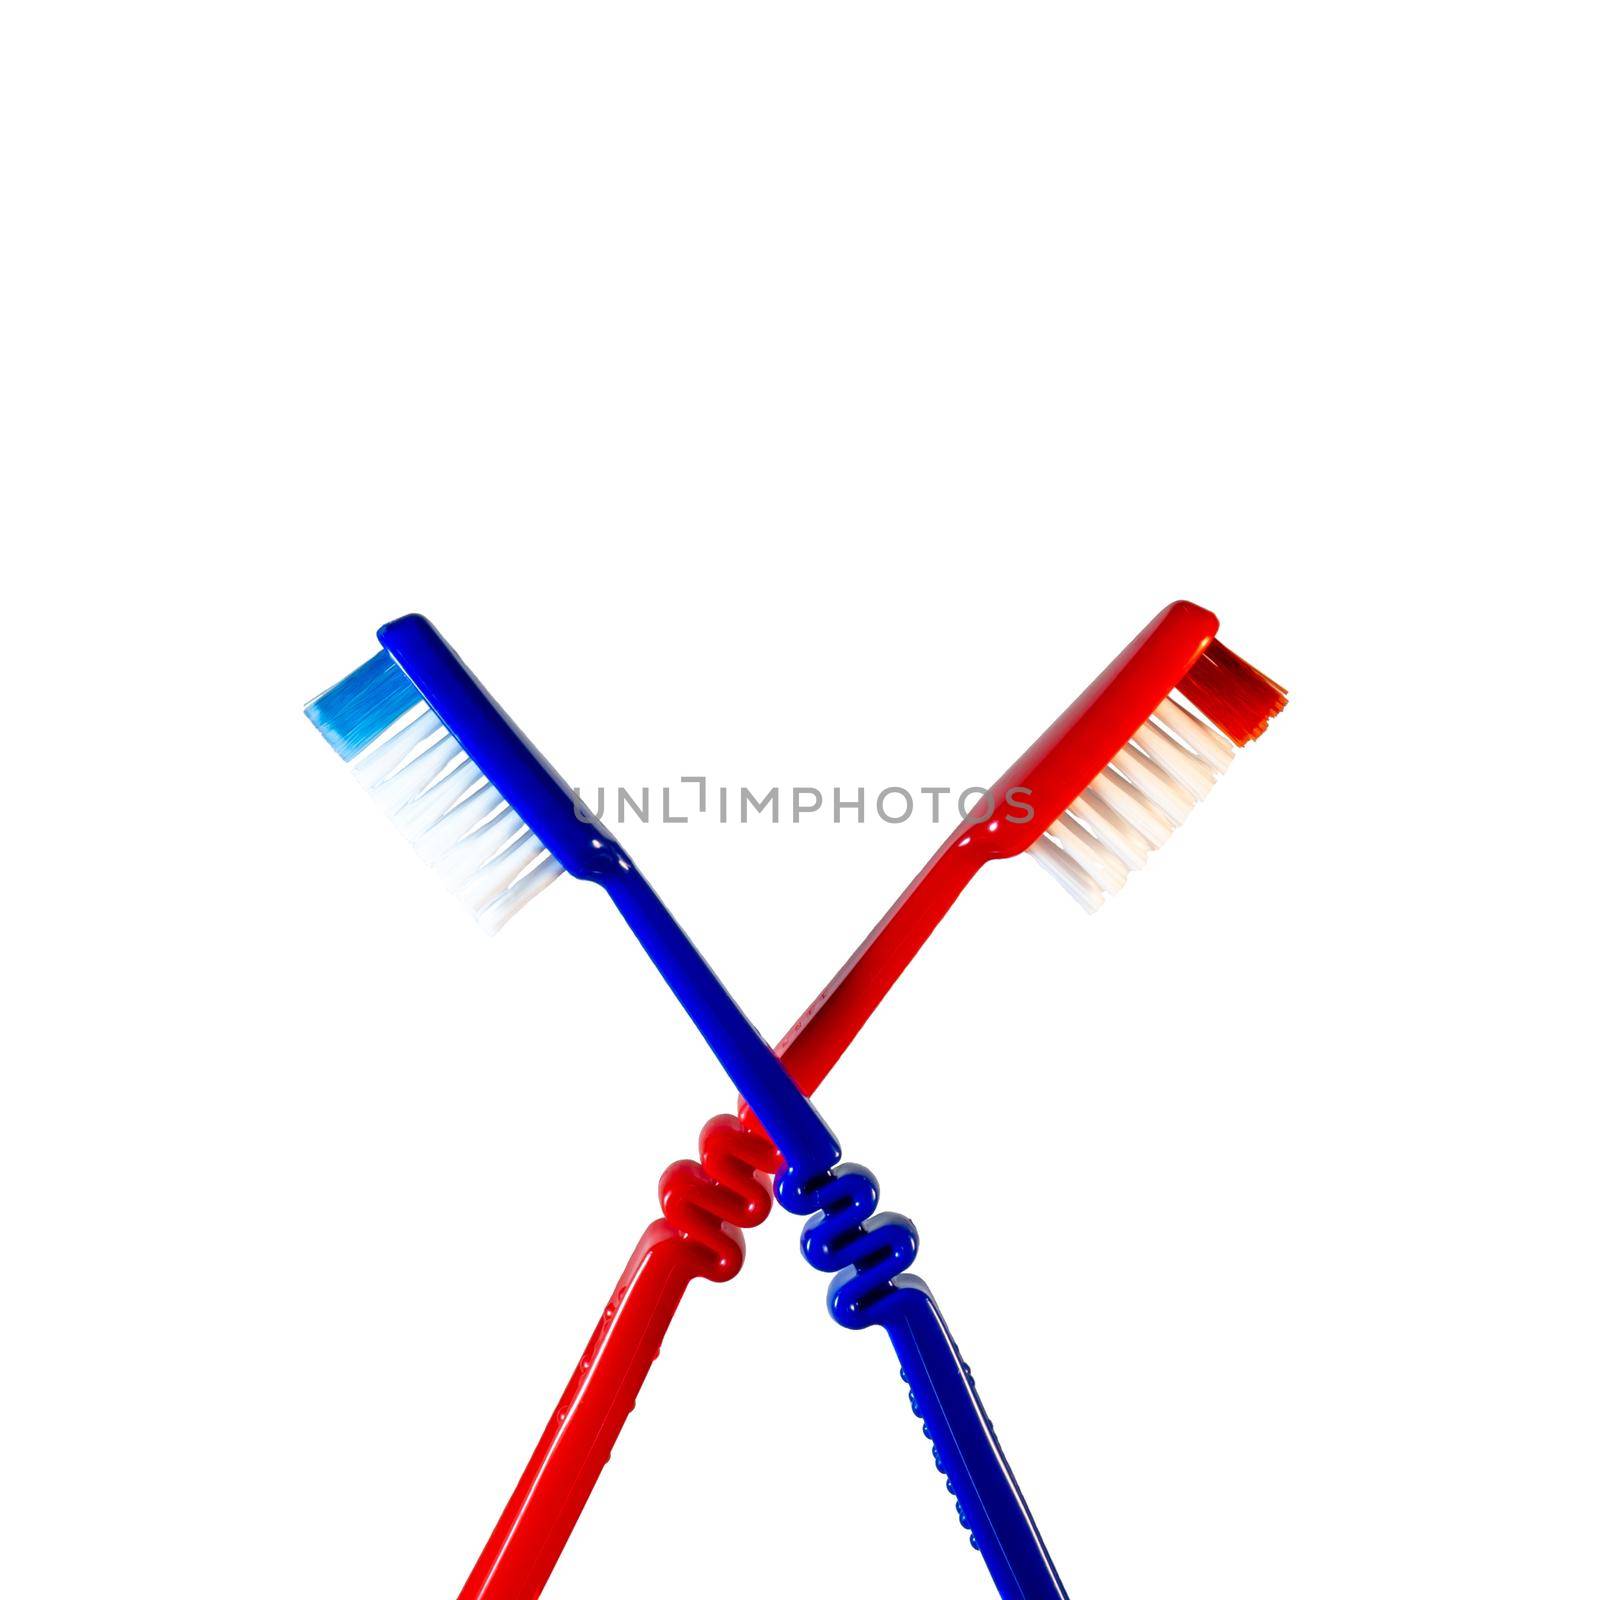 Two toothbrushes crossed on a white background. Blue and red toothbrushes by Puludi